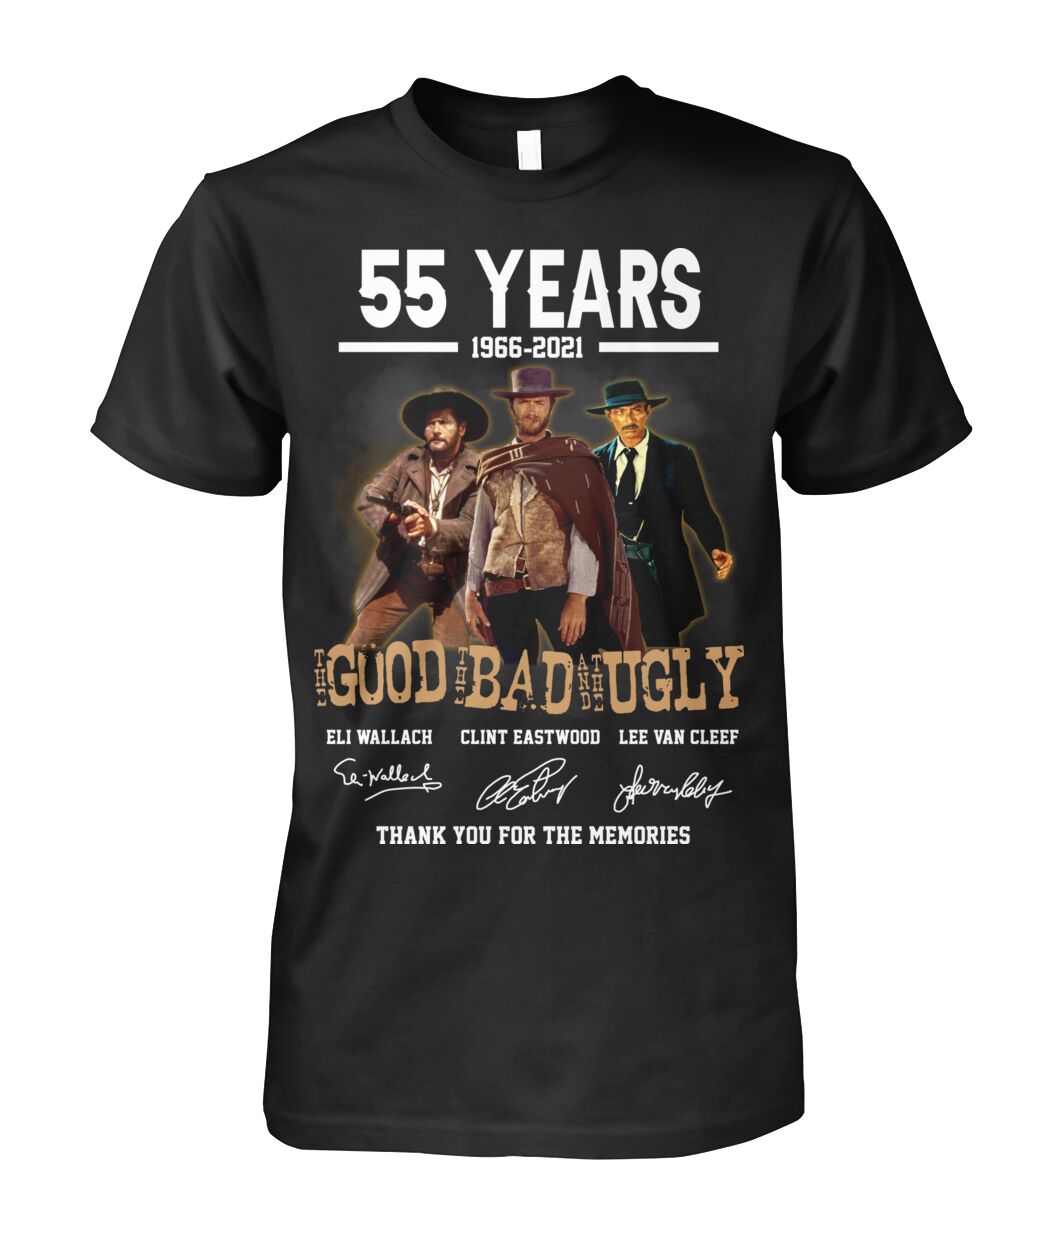 55 years the good the bad and the ugly signature shirt, tank top and sweatshirt